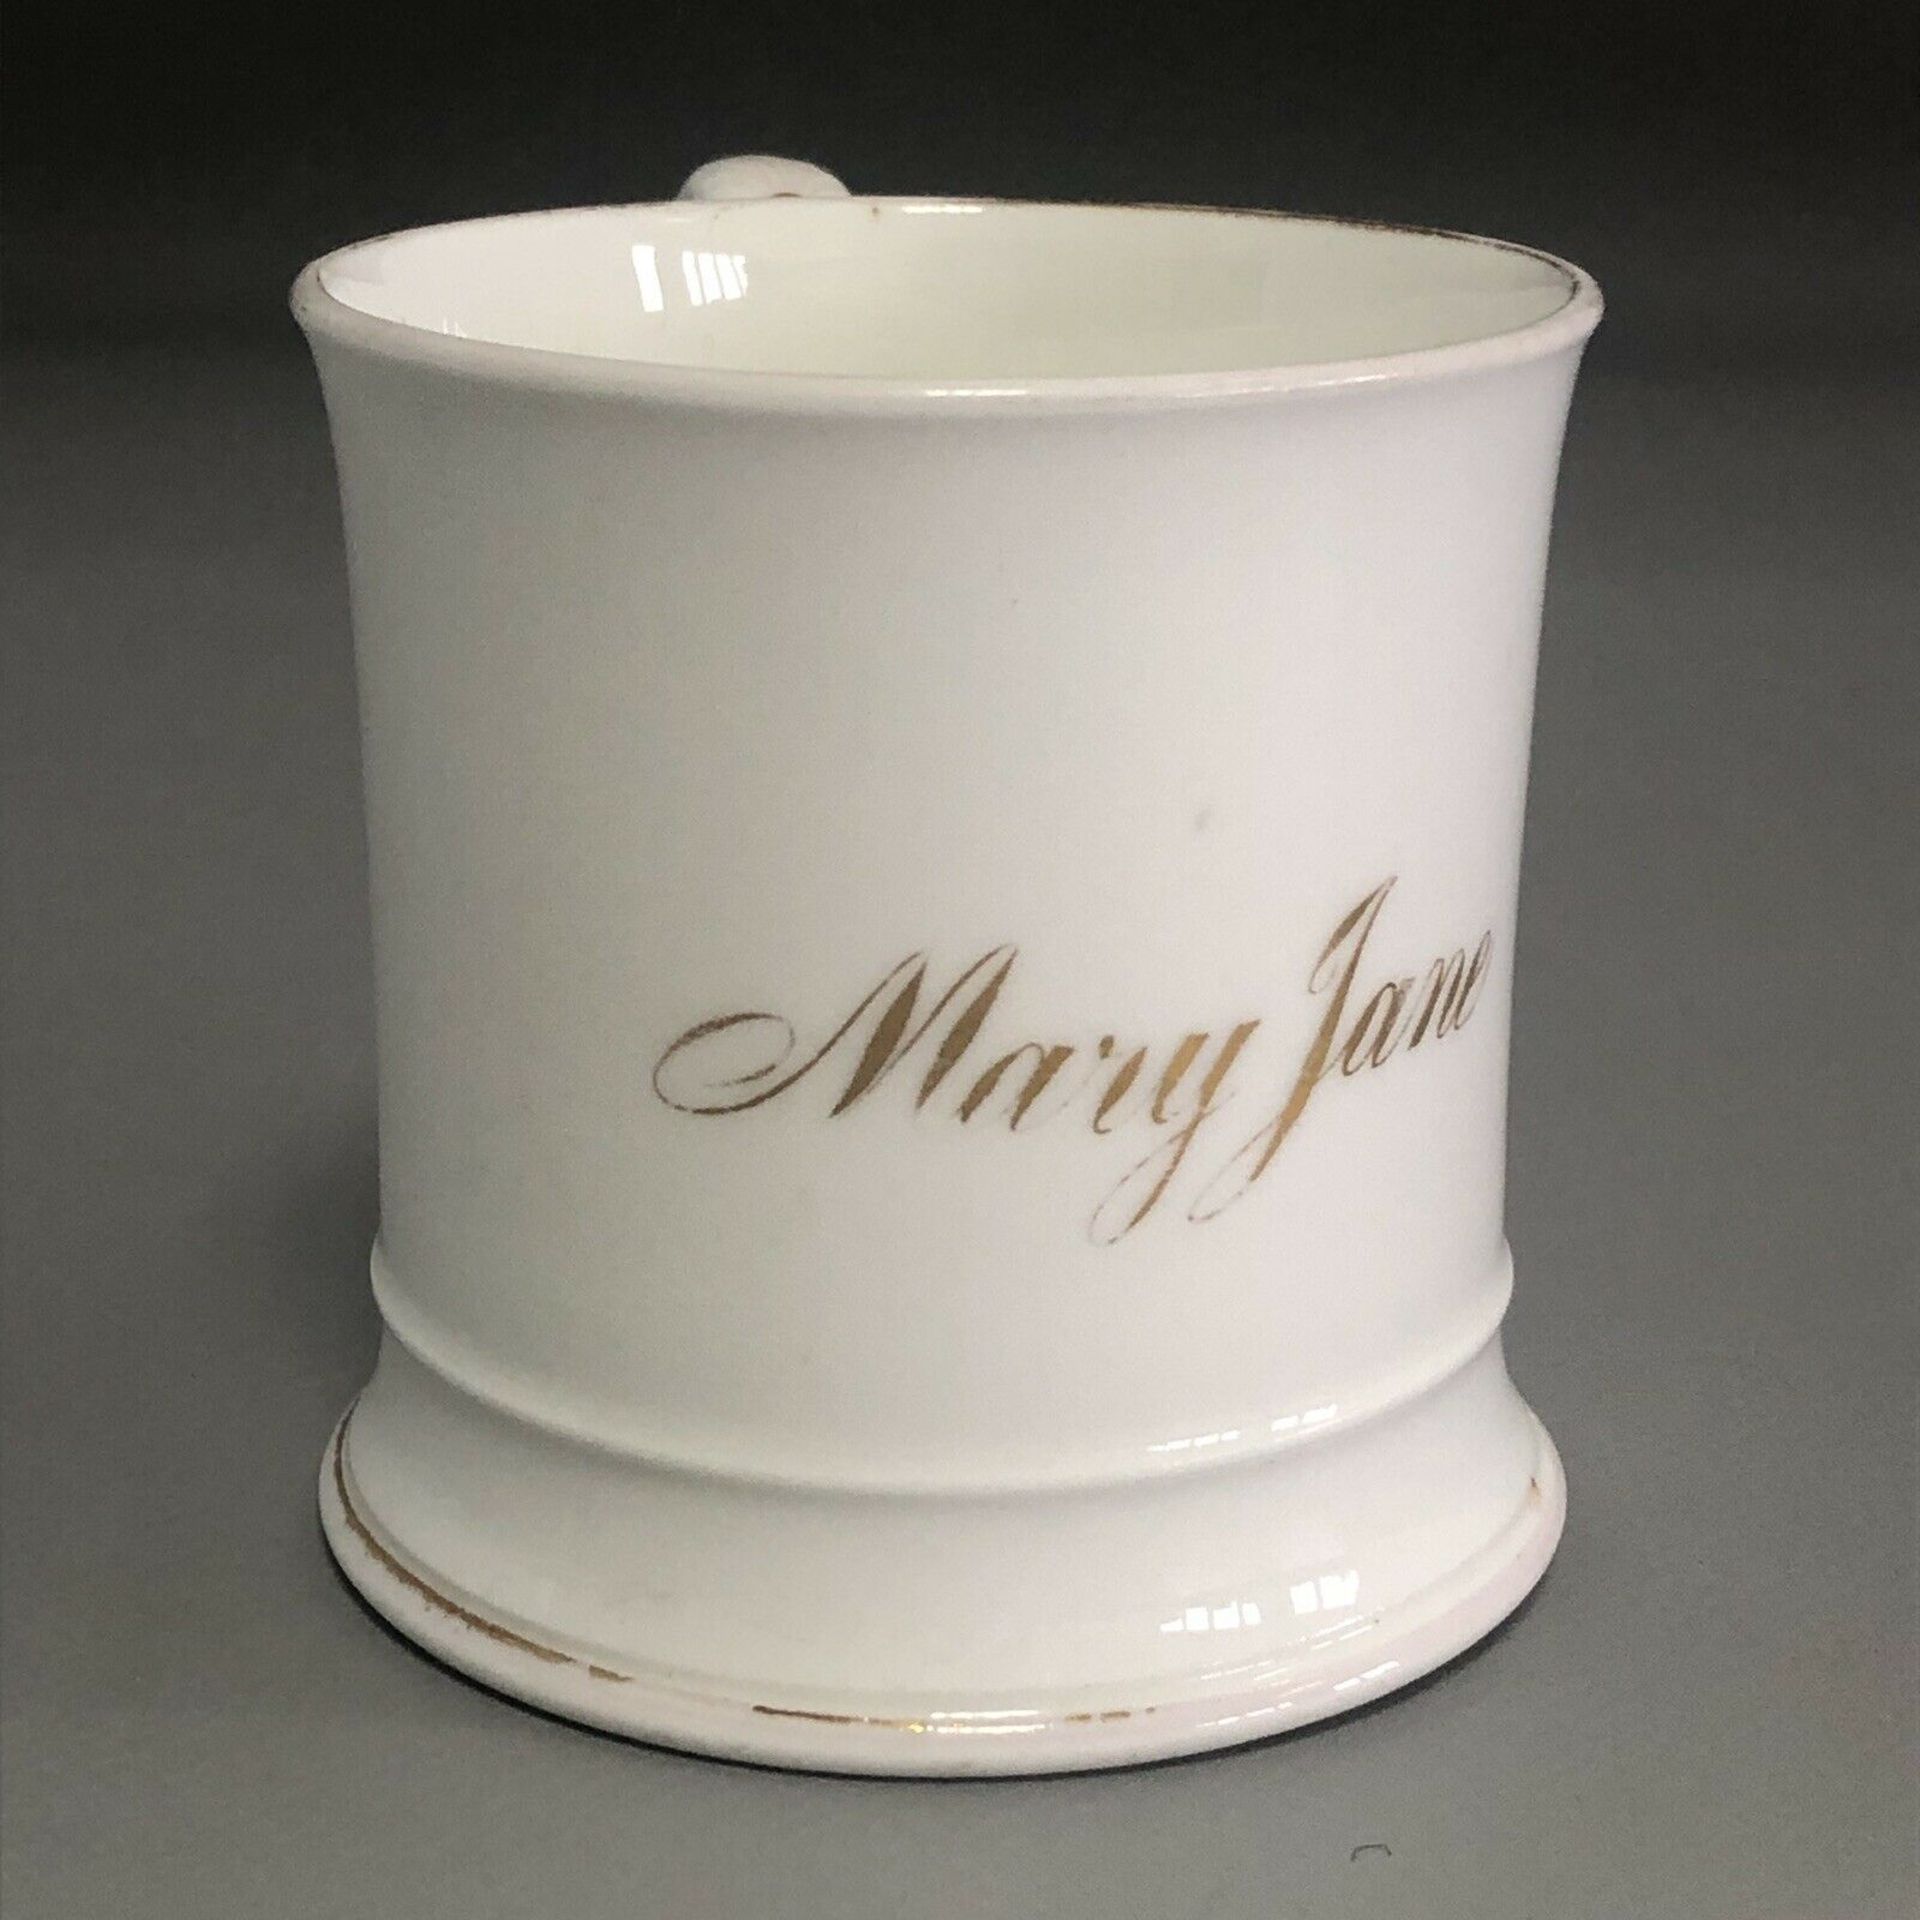 Antique 19th Century white porcelain child's tankard cup - named MARY JANE - Image 2 of 7